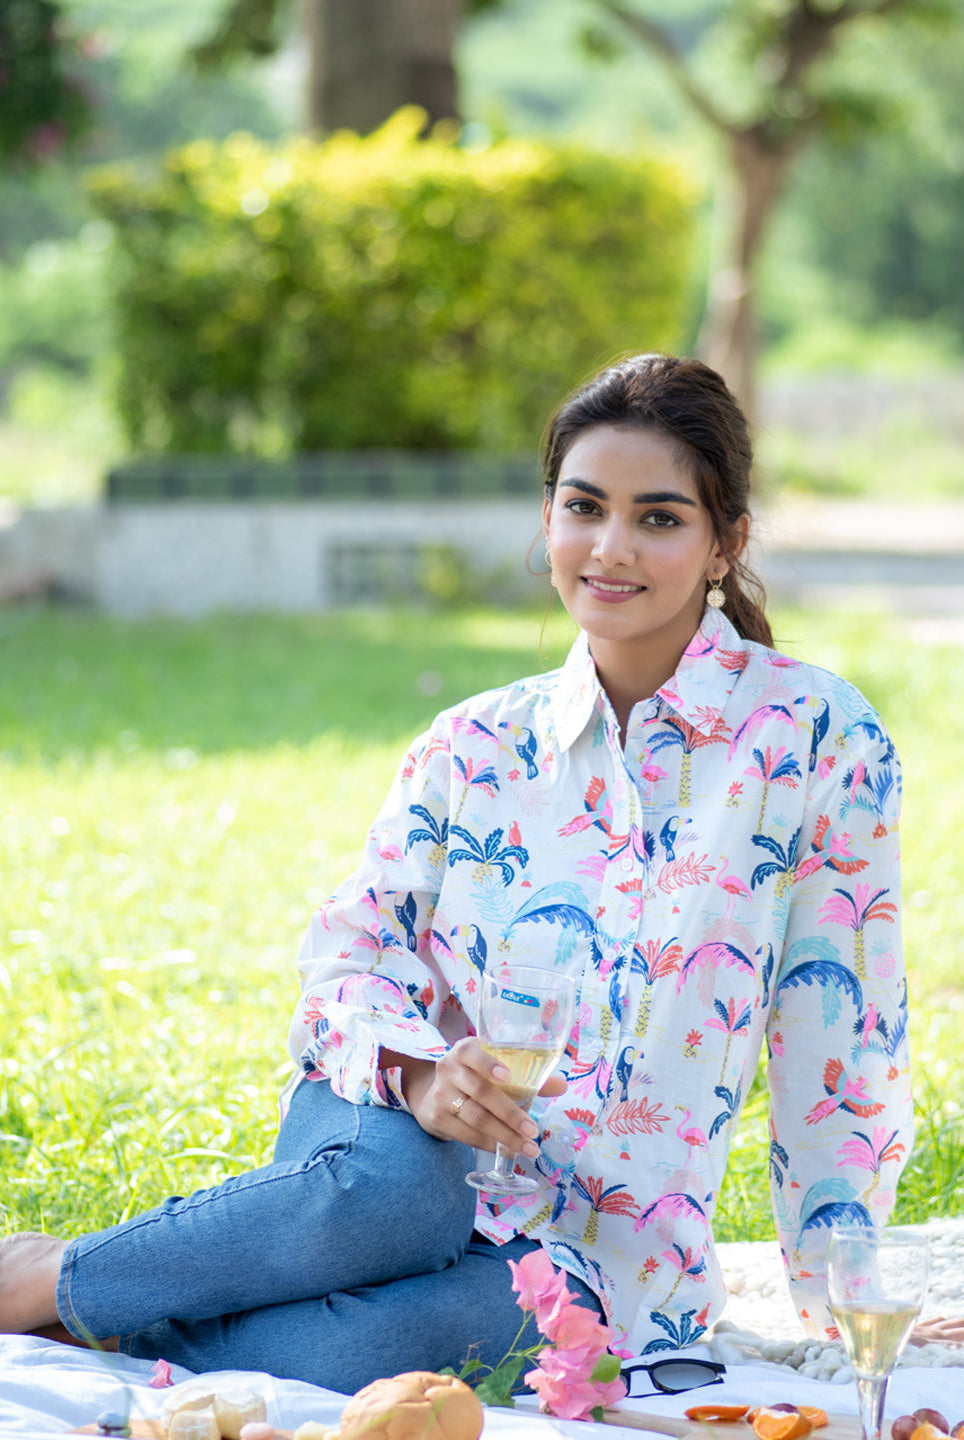 printed shirts for women